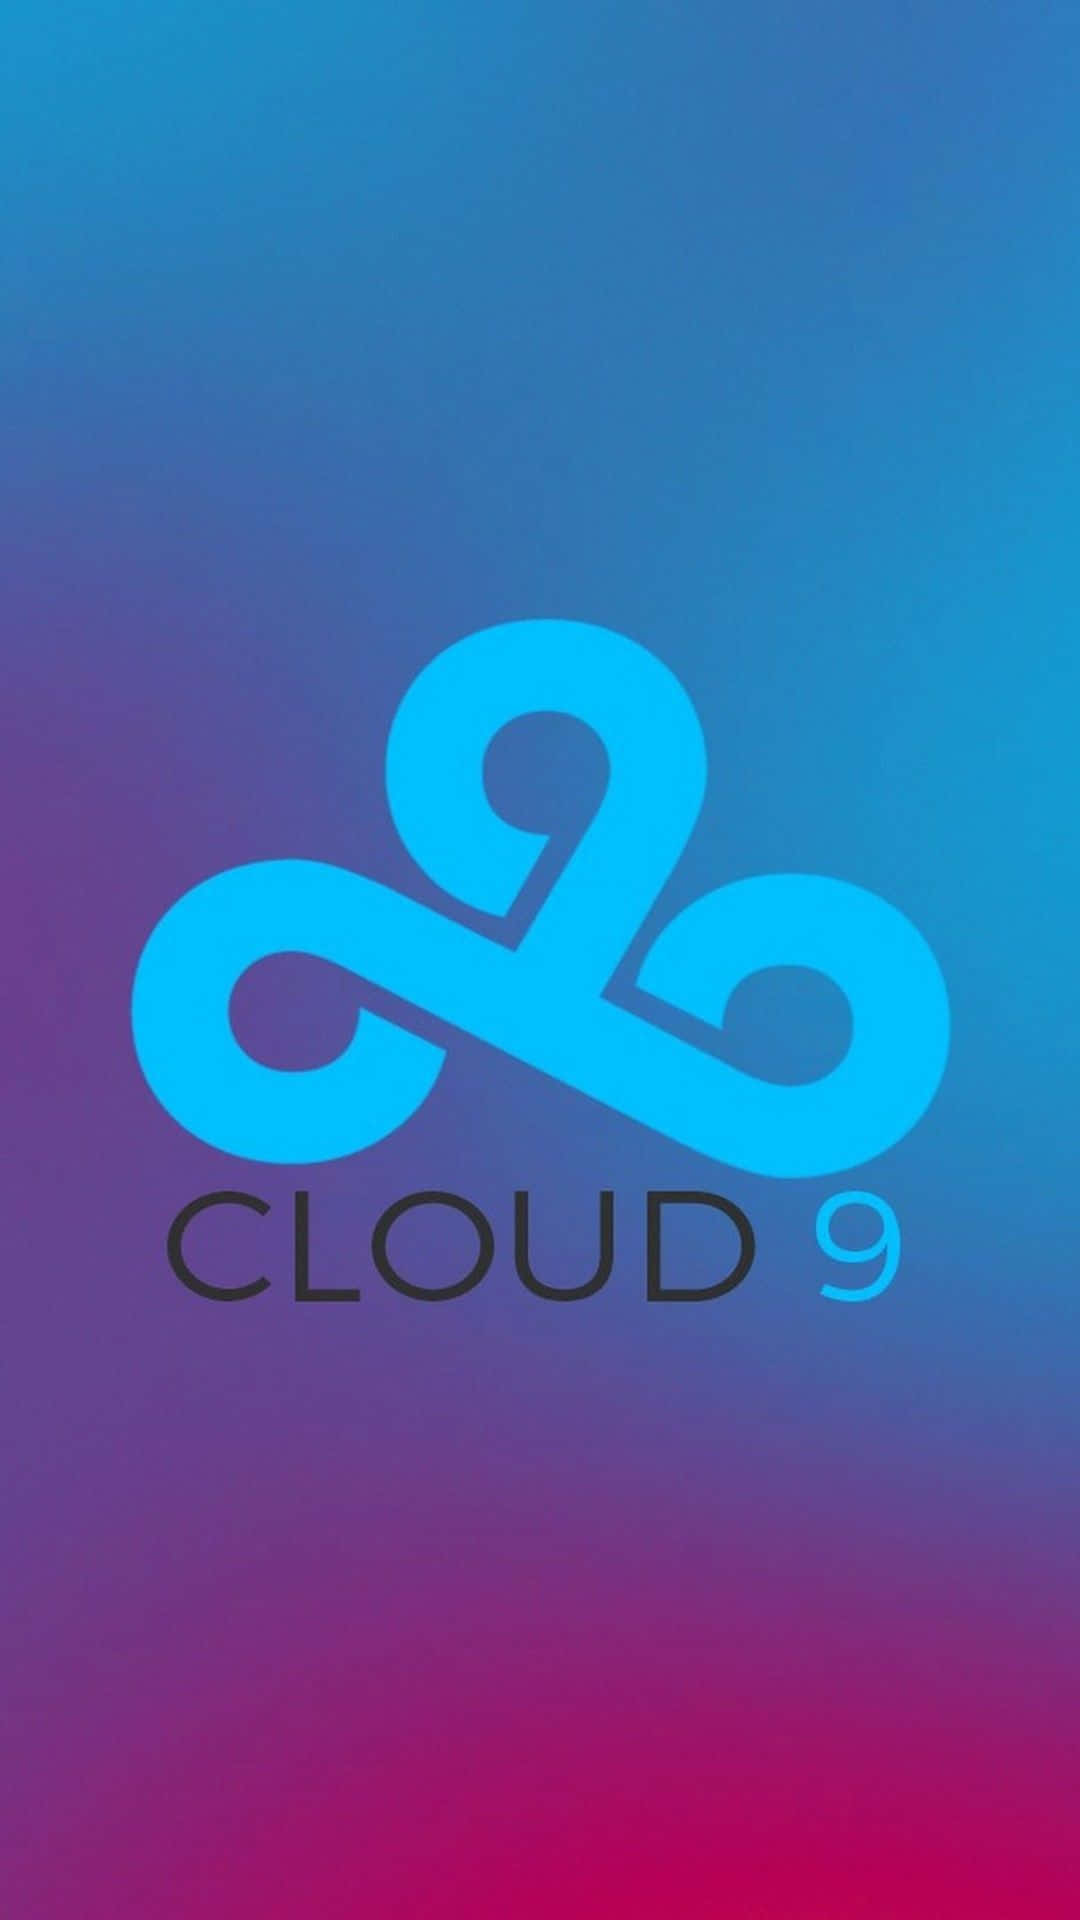 Get Ready to Take off with Cloud 9 Wallpaper